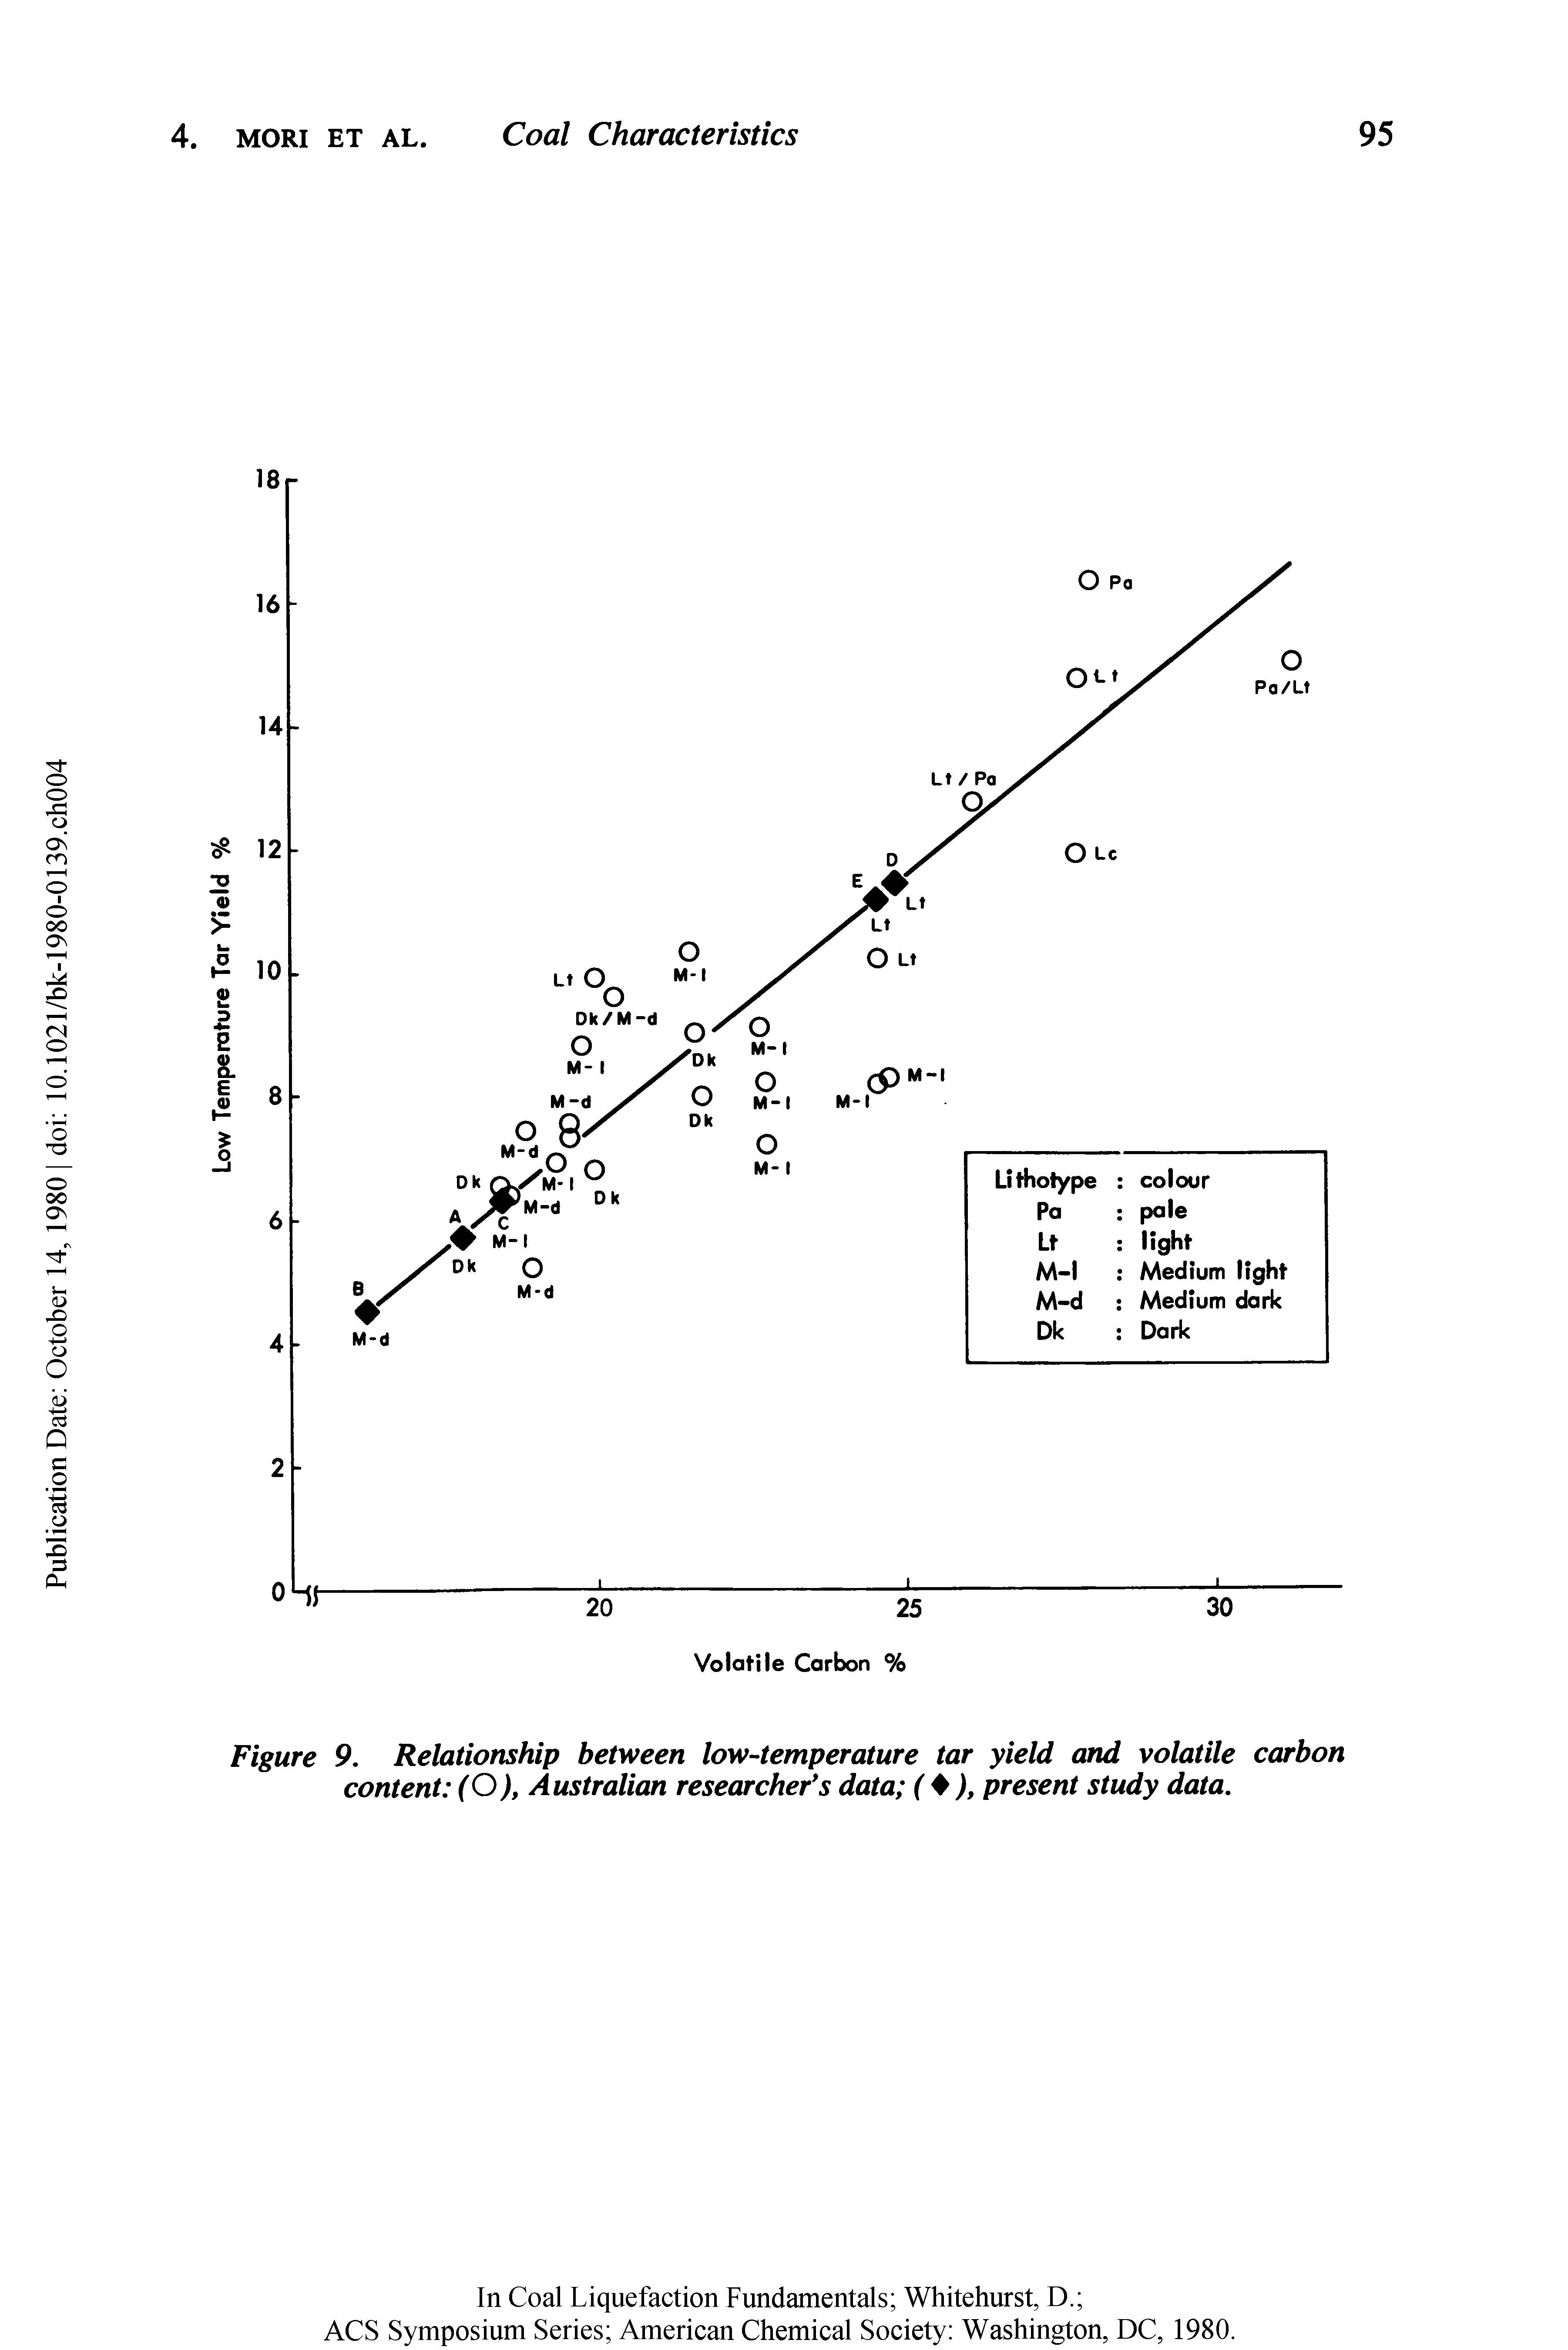 Figure 9. Relationship between low-temperature tar yield and volatile carbon content (O), Australian researcher s data ( + ), present study data.